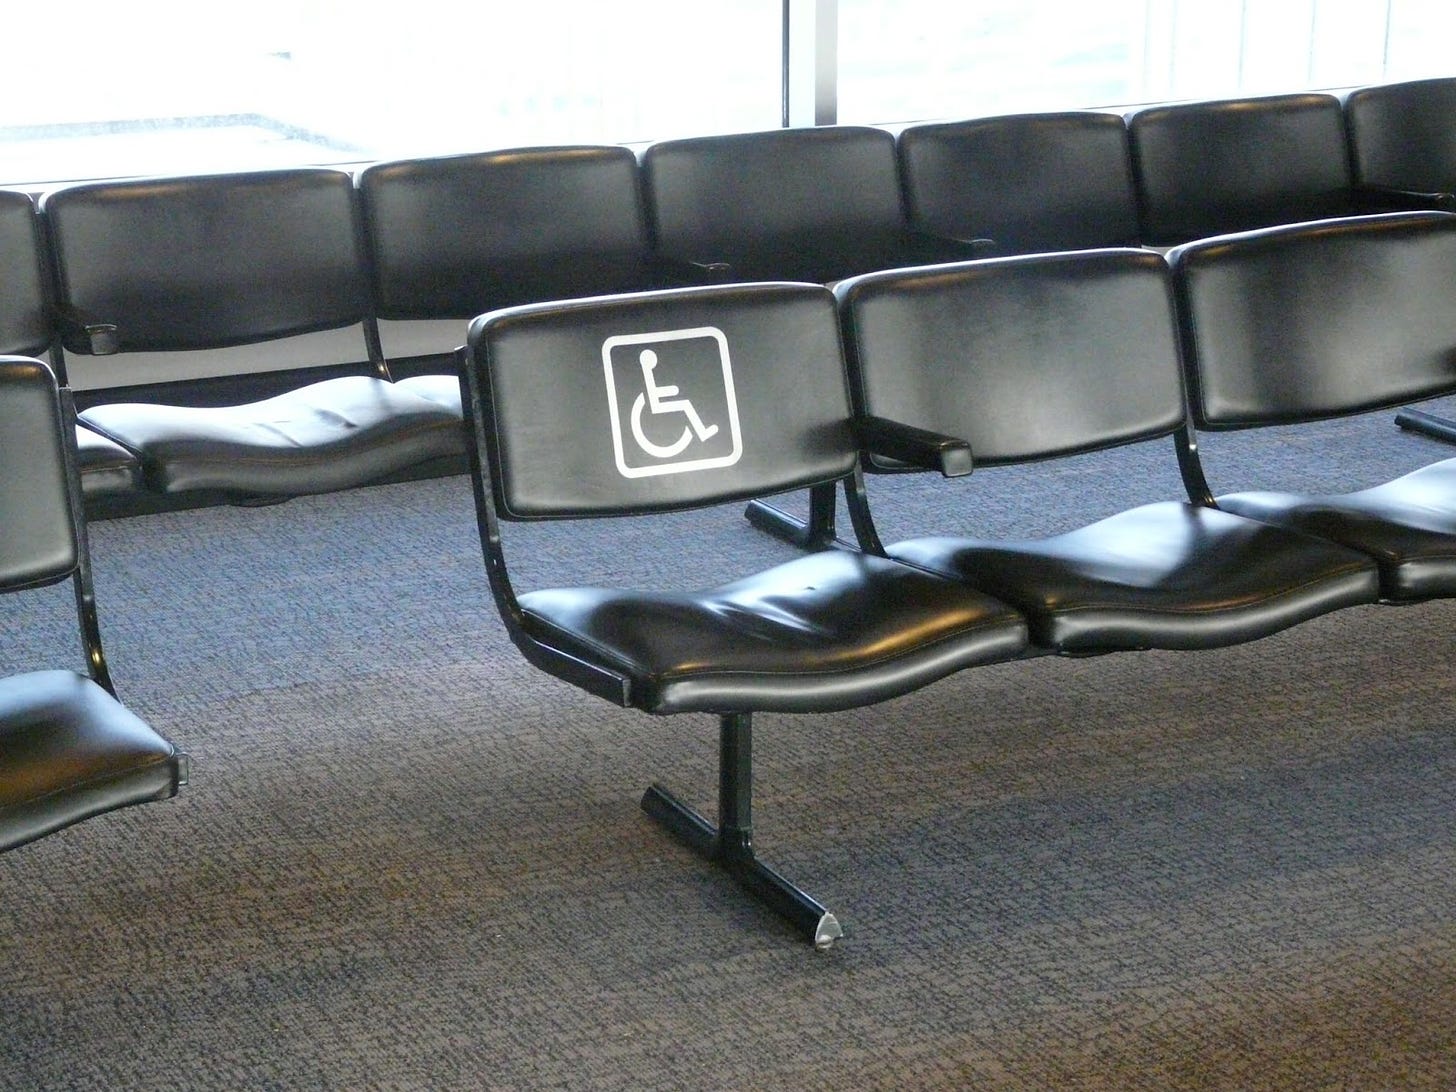 A photo that shows a row of black chairs at an airport. One chair has a pictogram on its backrest symbolizing a person in a wheelchair.